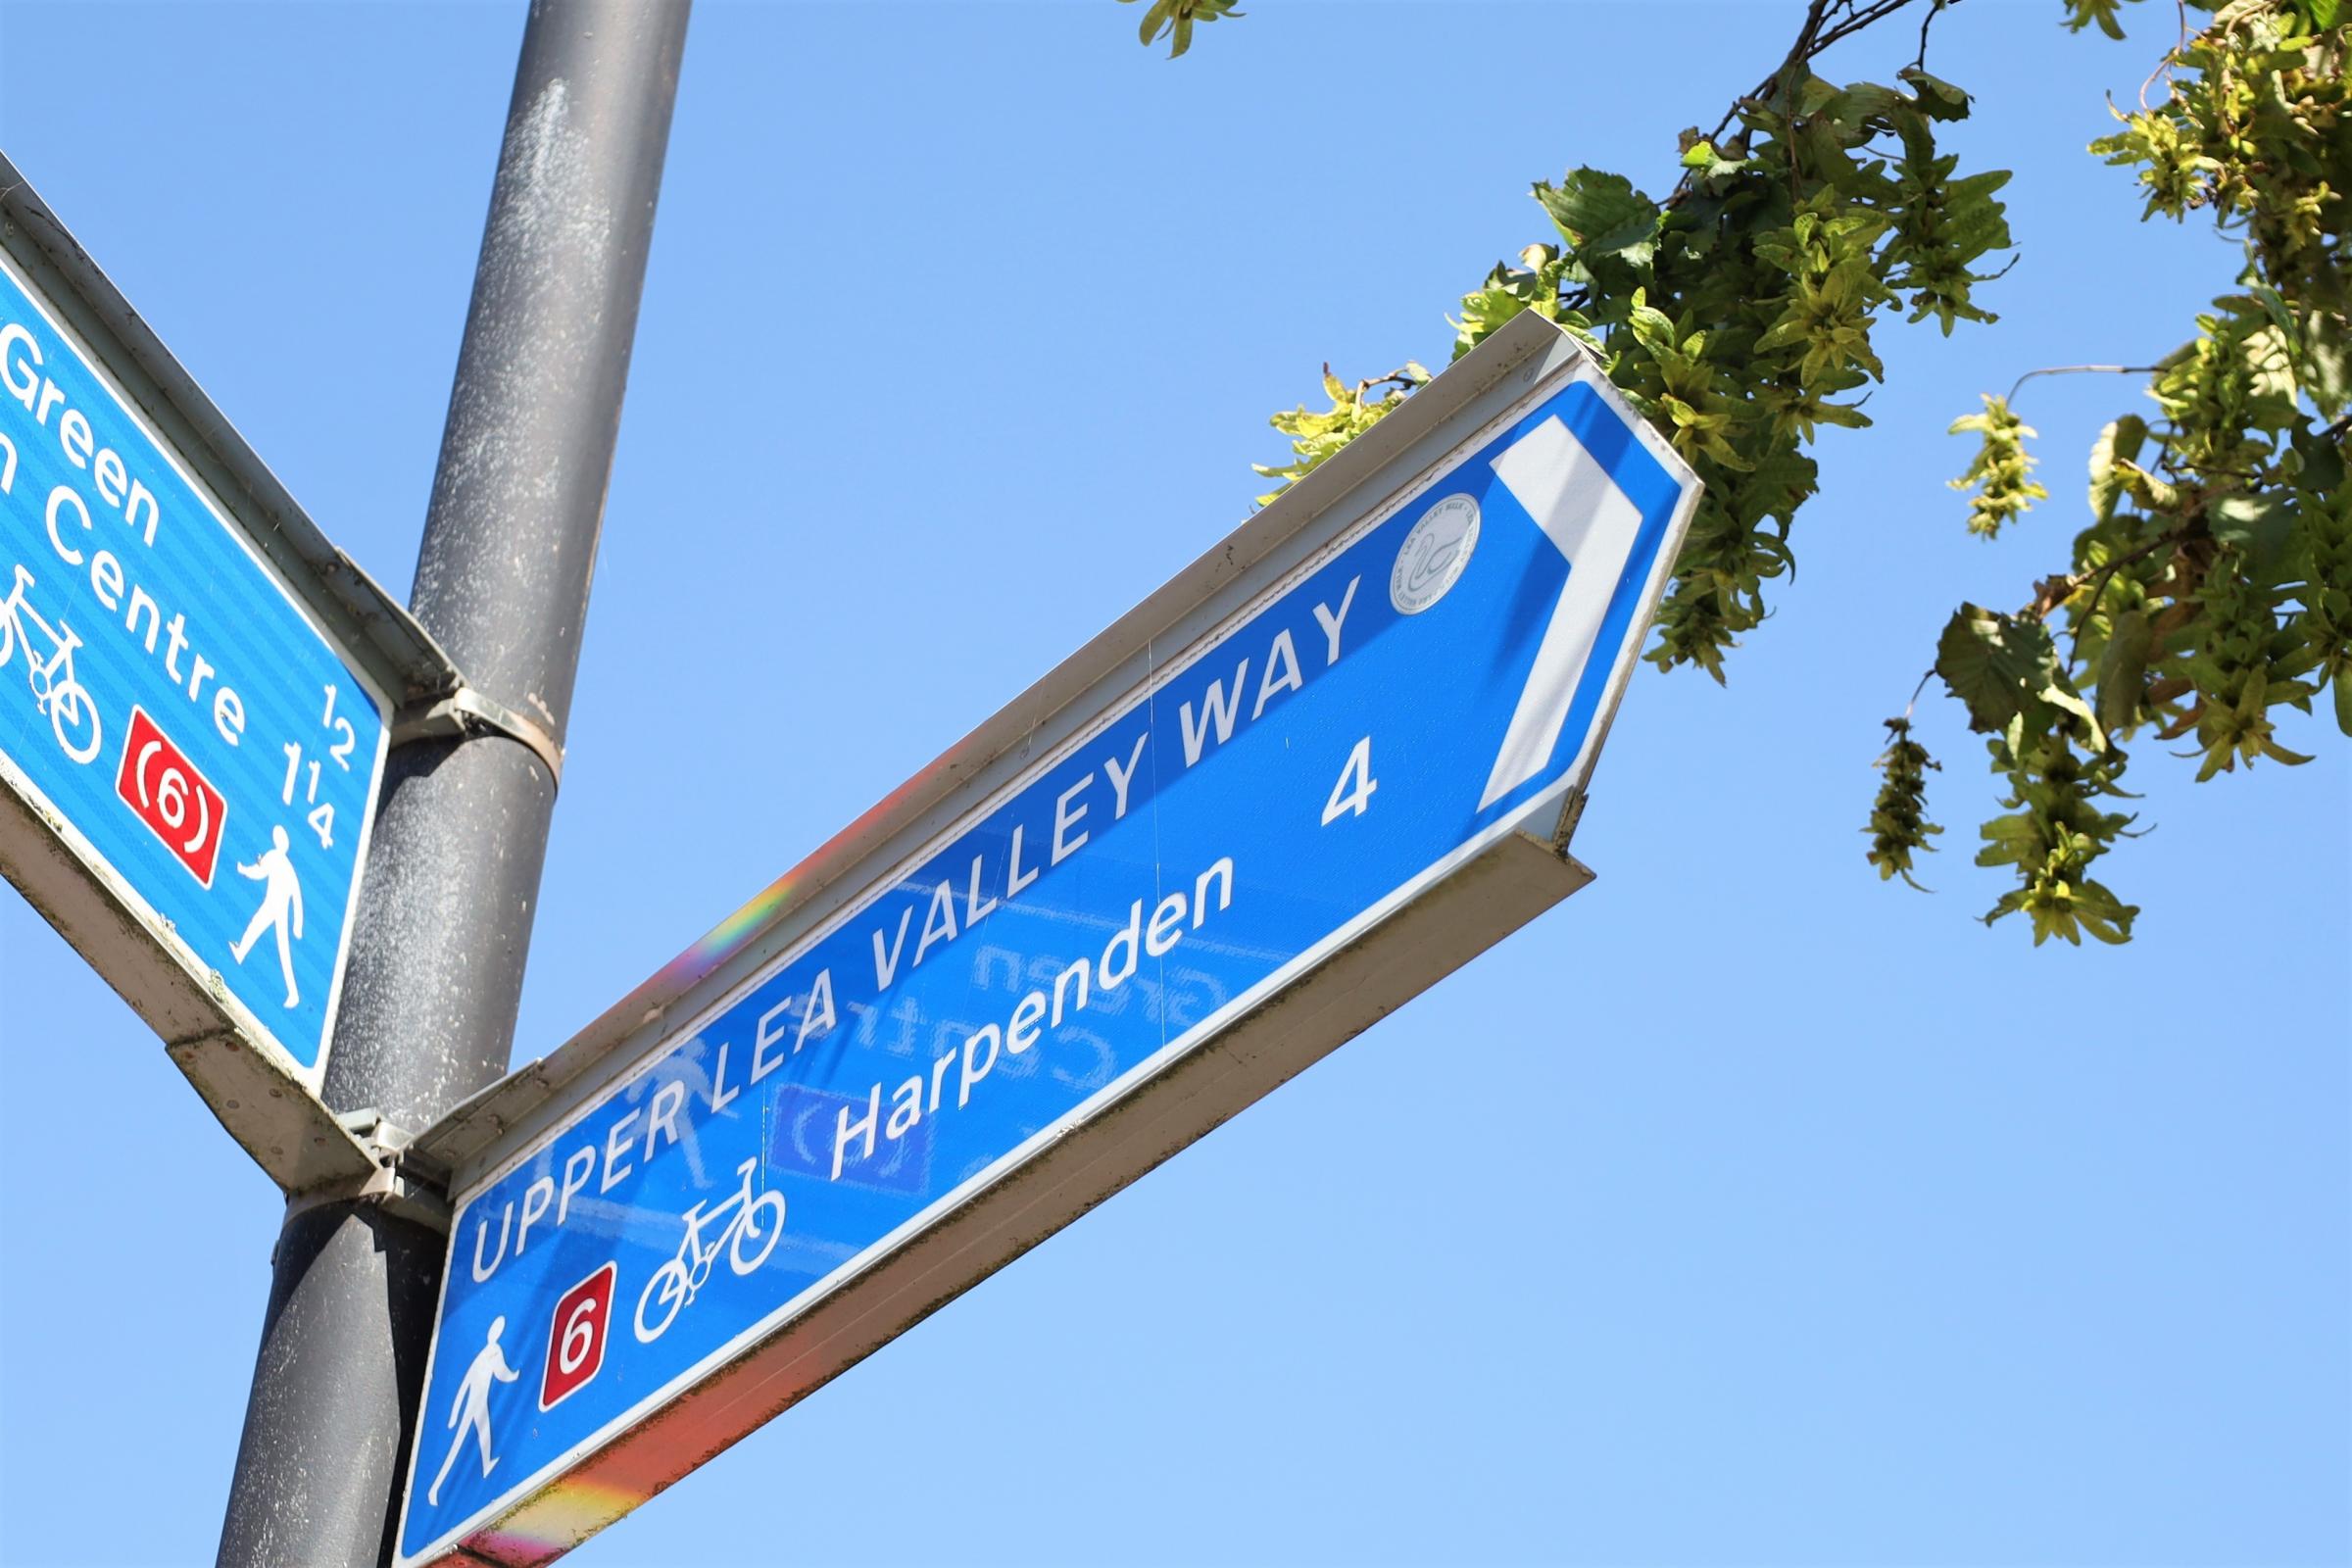 An Upper Lea Valley Way sign towards Harpenden, Hertfordshire. Credit: Will Durrant/LDRS